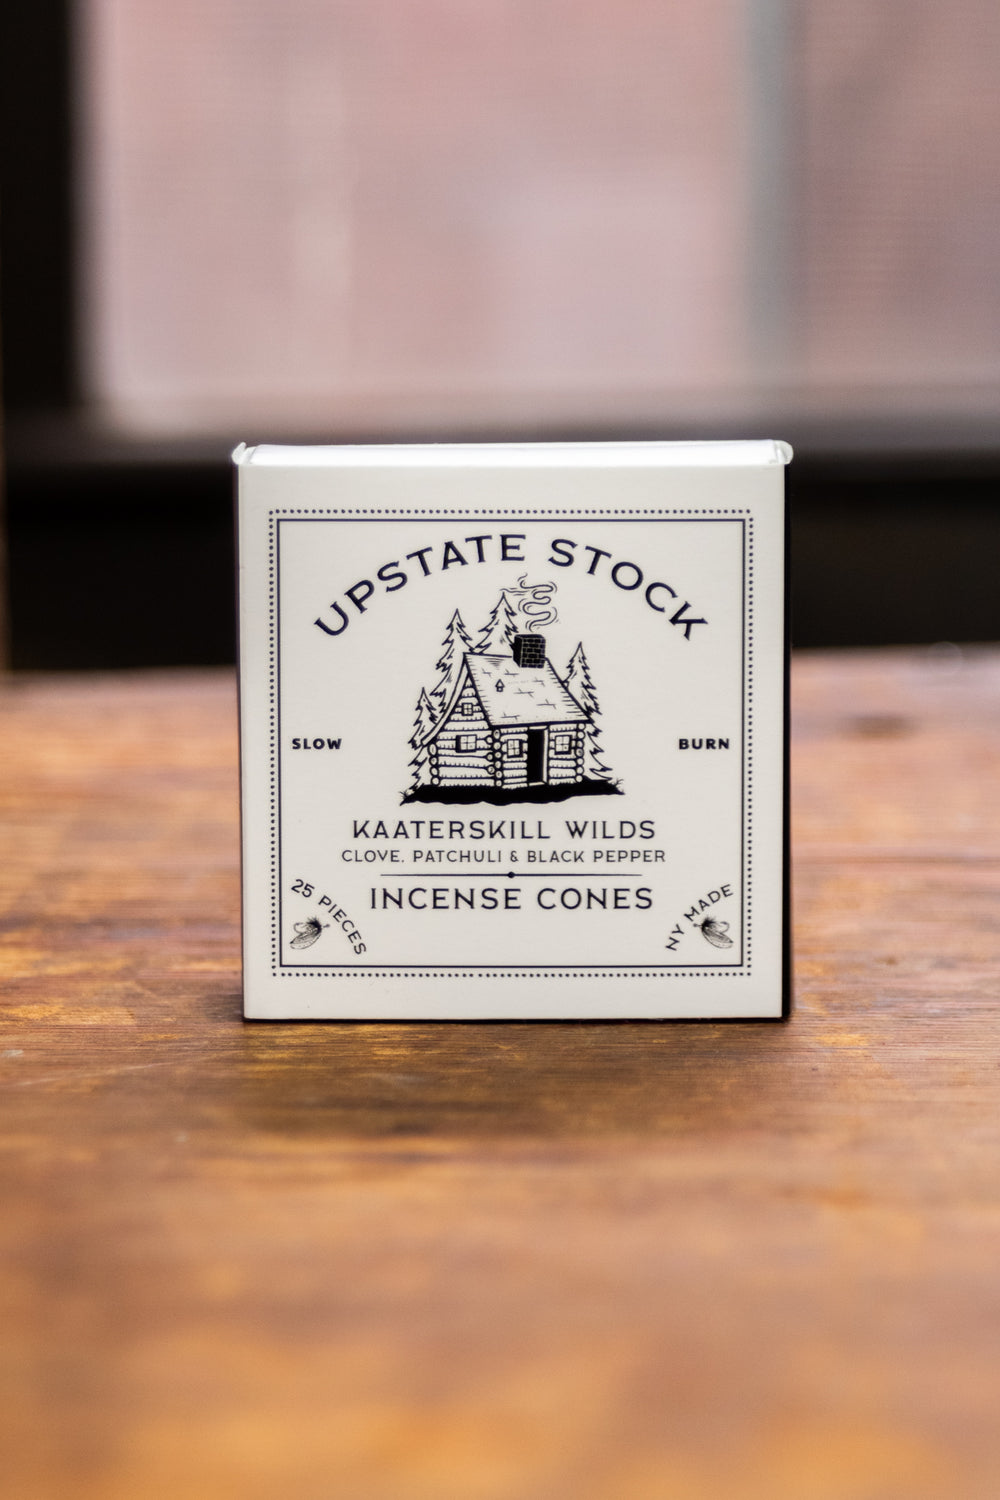 Upstate Stock Candles & Incense – UPSTATE STOCK